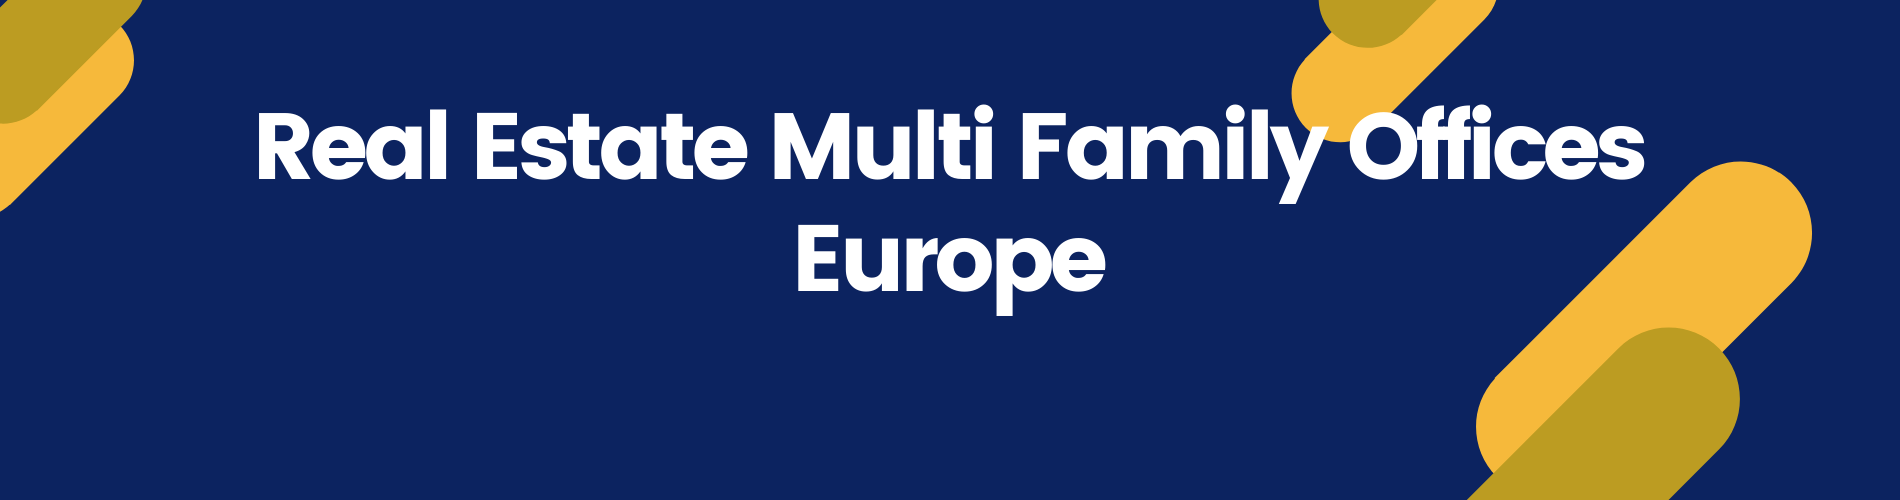 RE Multi Family Offices Europe Overview